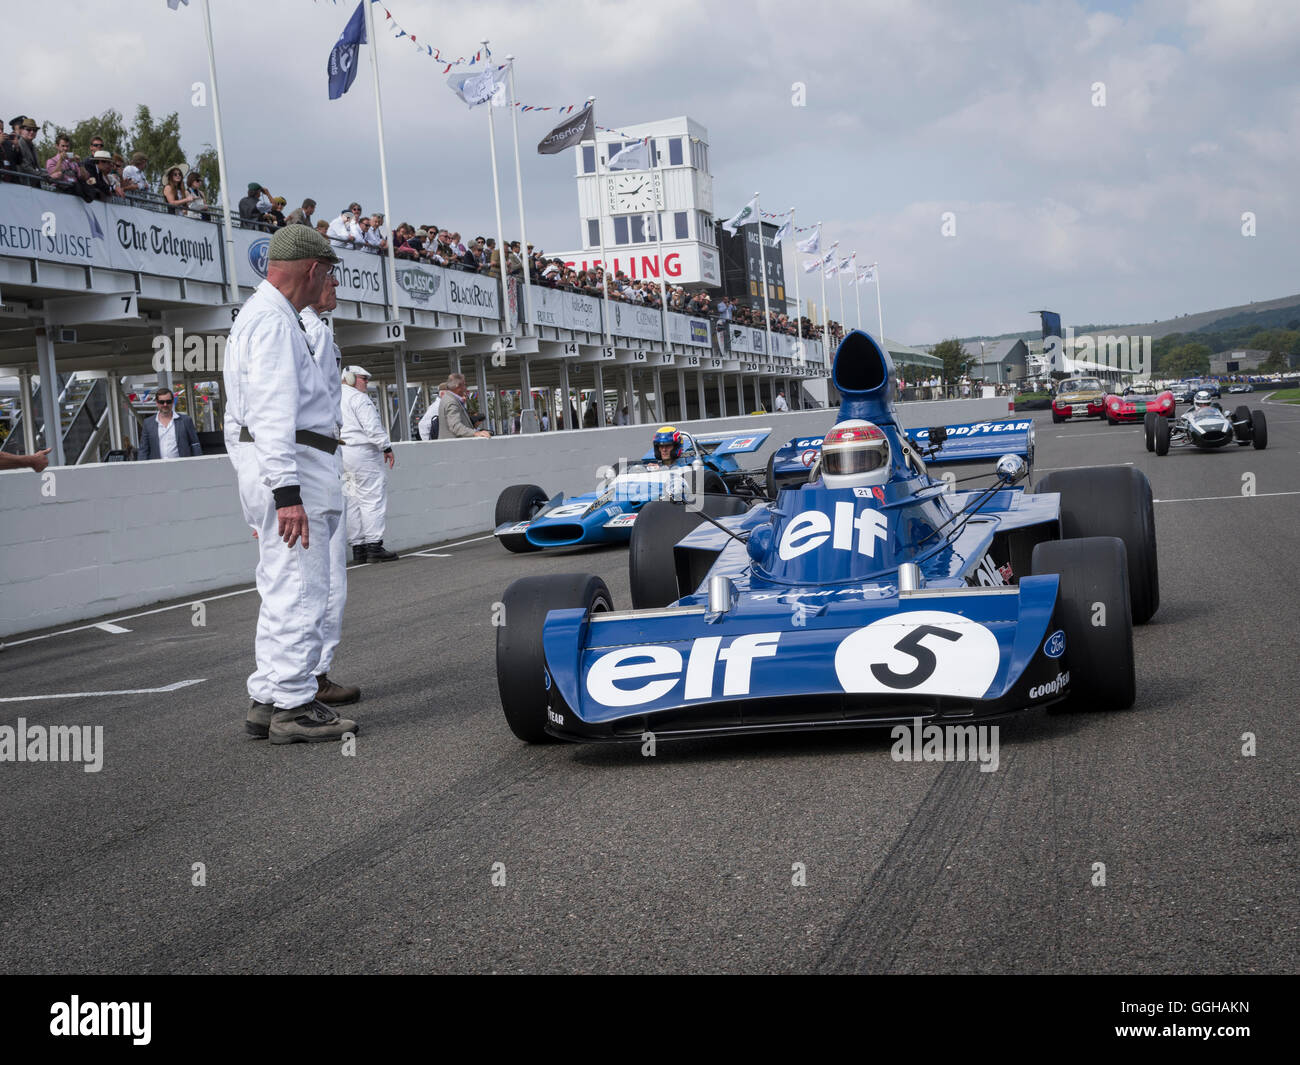 Sir Jackie Stewart, in his Tyrell 006 in which he won the 1973 world championship, Goodwood Revival 2014, Racing Sport, Classic Stock Photo